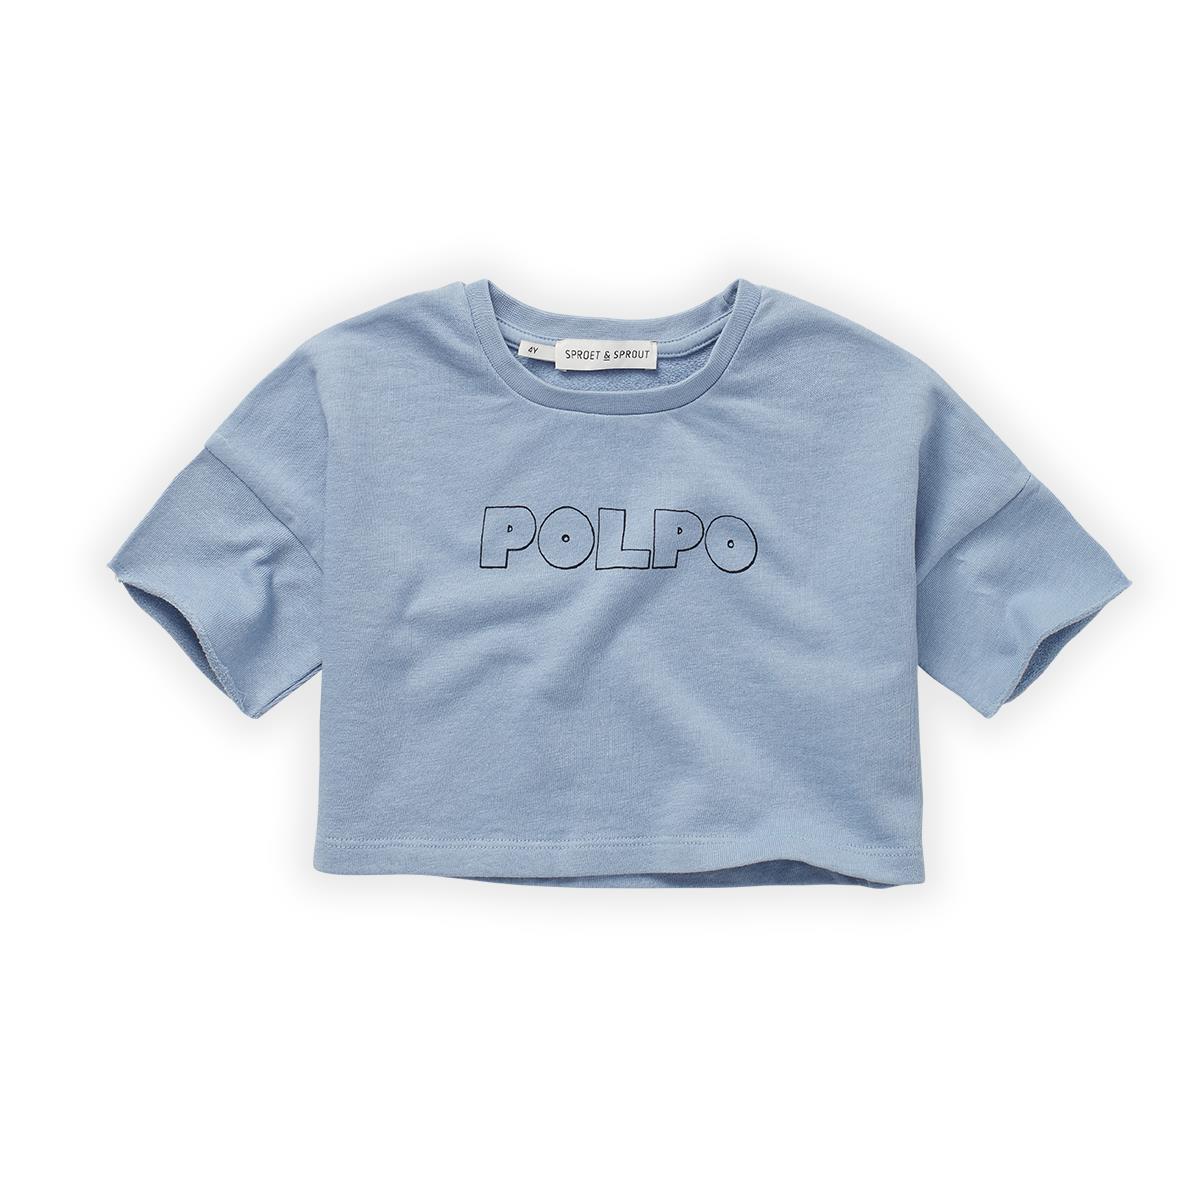 Sproet & Sprout - Cropped t-shirt polpo